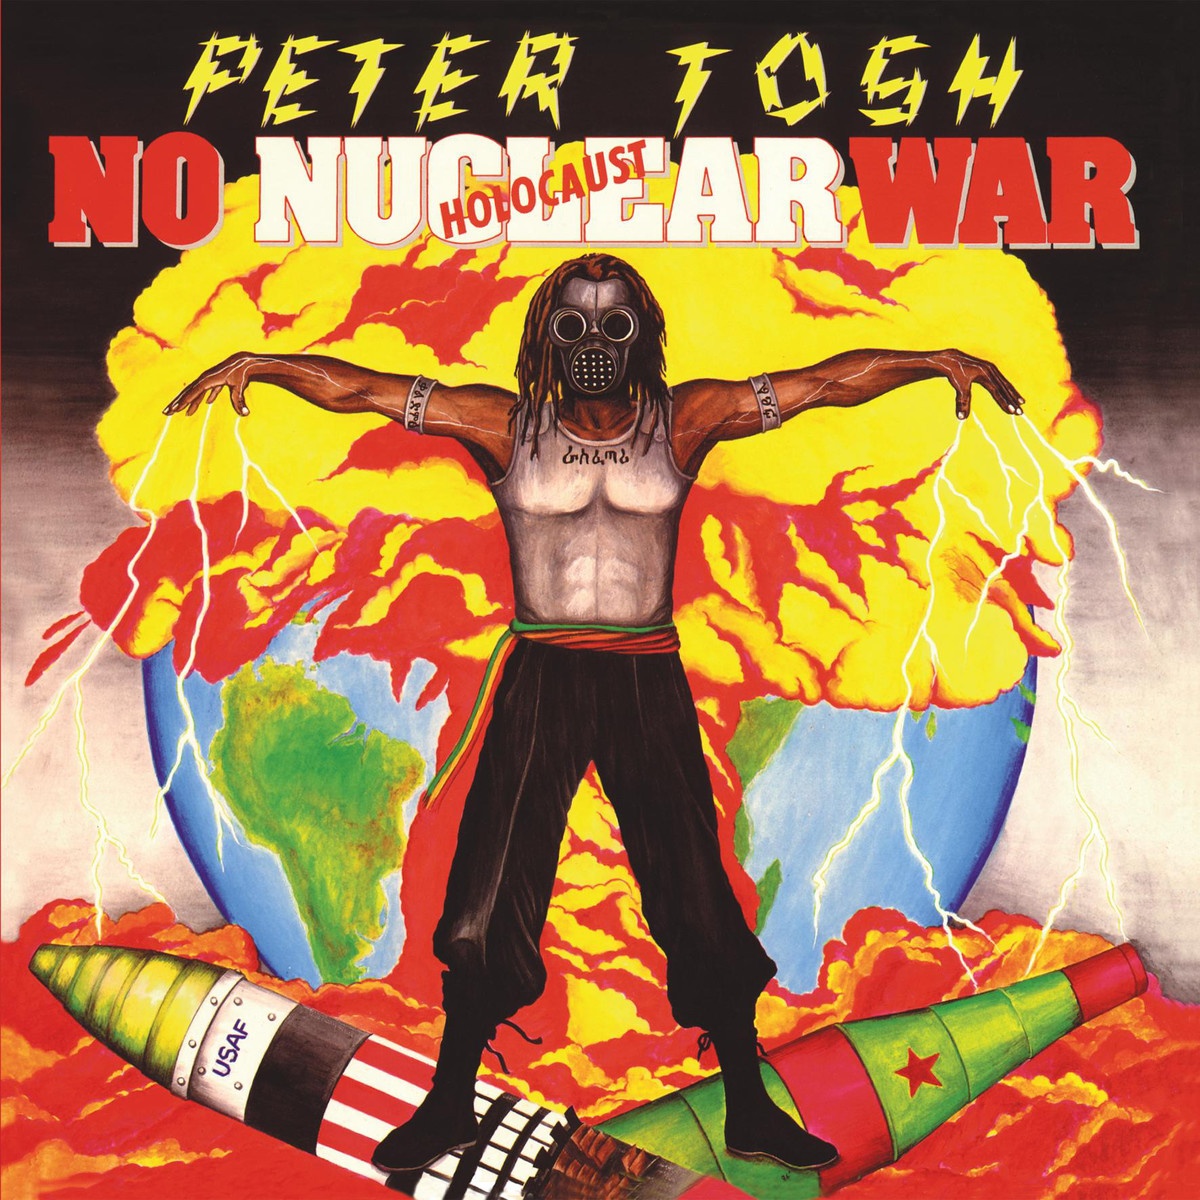 No Nuclear War (2002 Remastered Version)